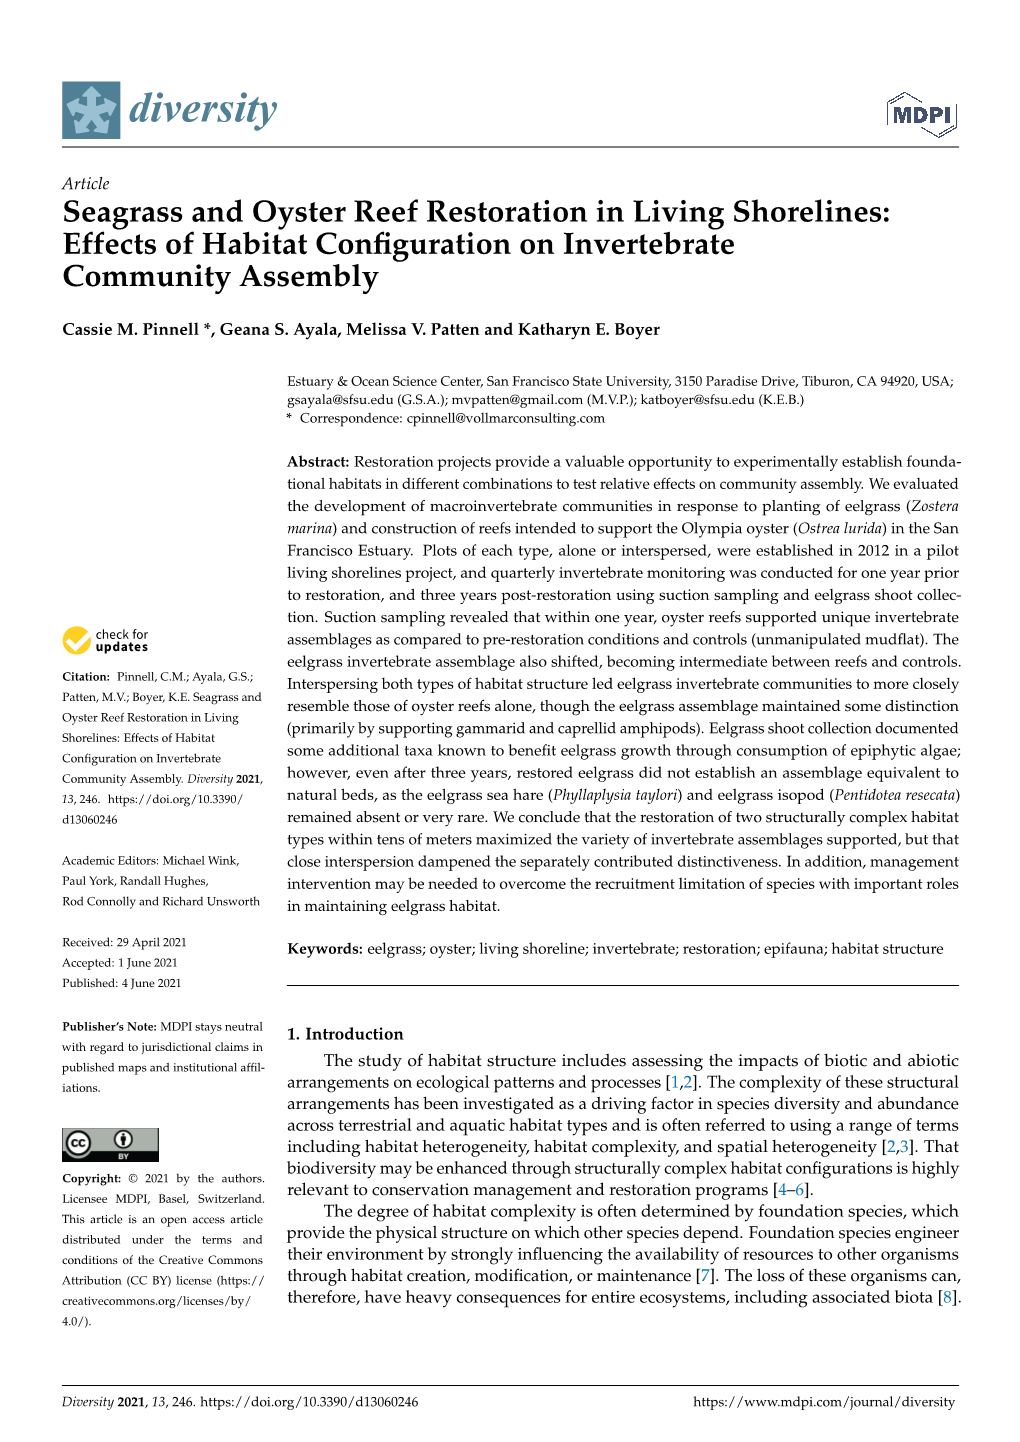 Seagrass and Oyster Reef Restoration in Living Shorelines: Effects of Habitat Conﬁguration on Invertebrate Community Assembly